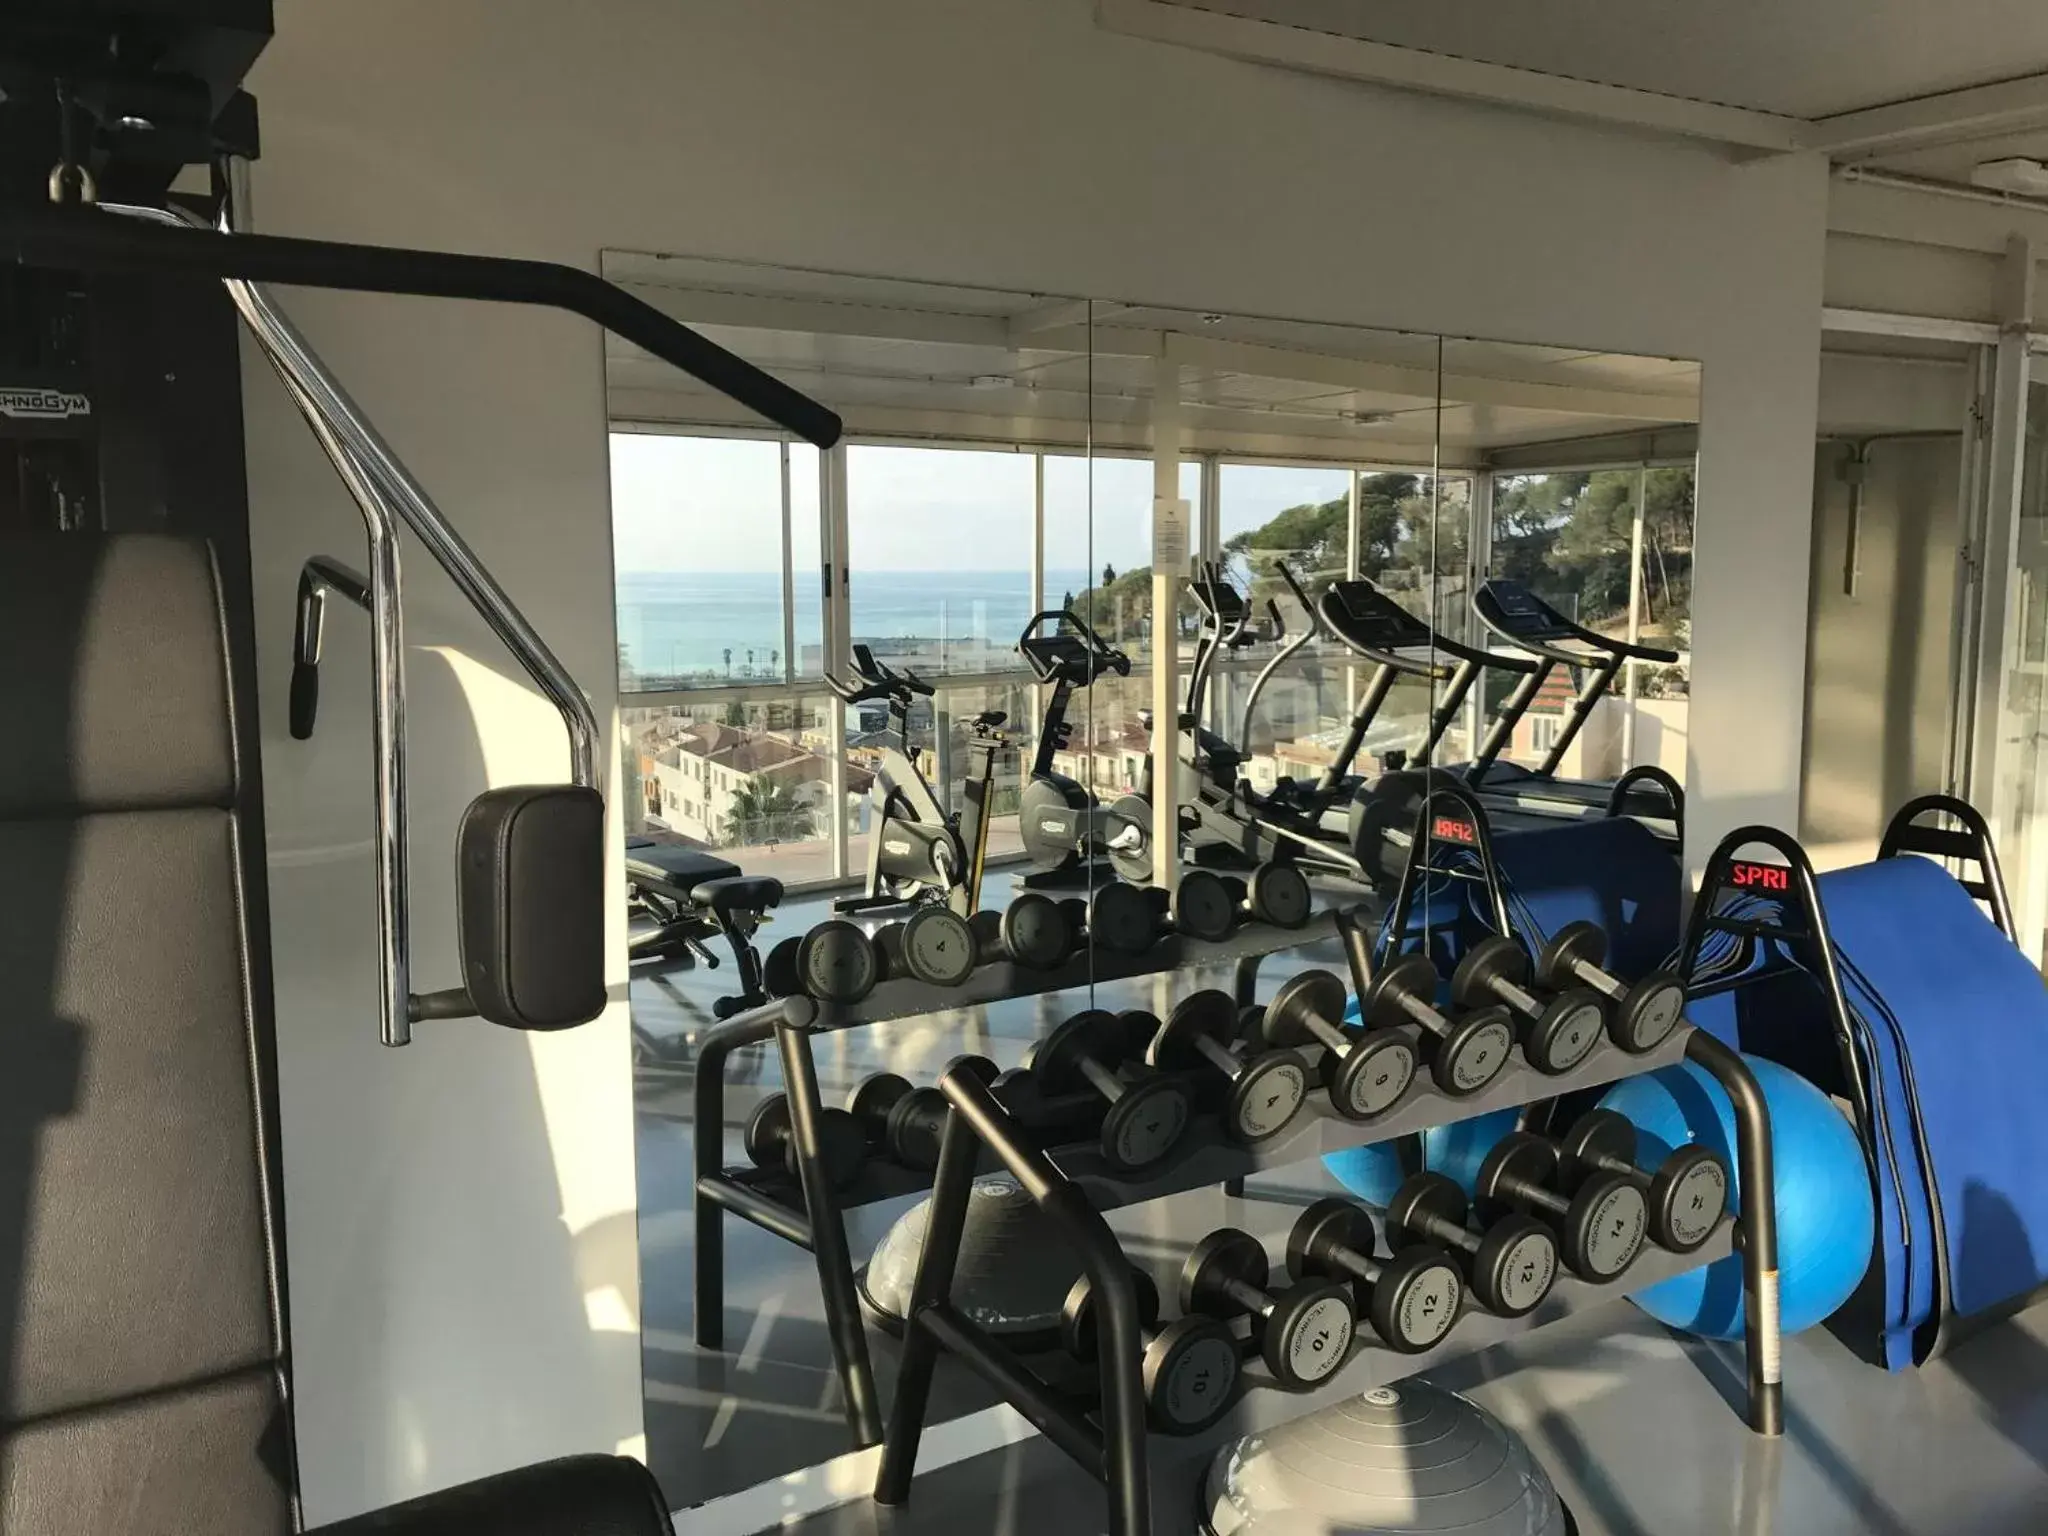 Fitness centre/facilities, Fitness Center/Facilities in Dynamic Hotels Caldetes Barcelona